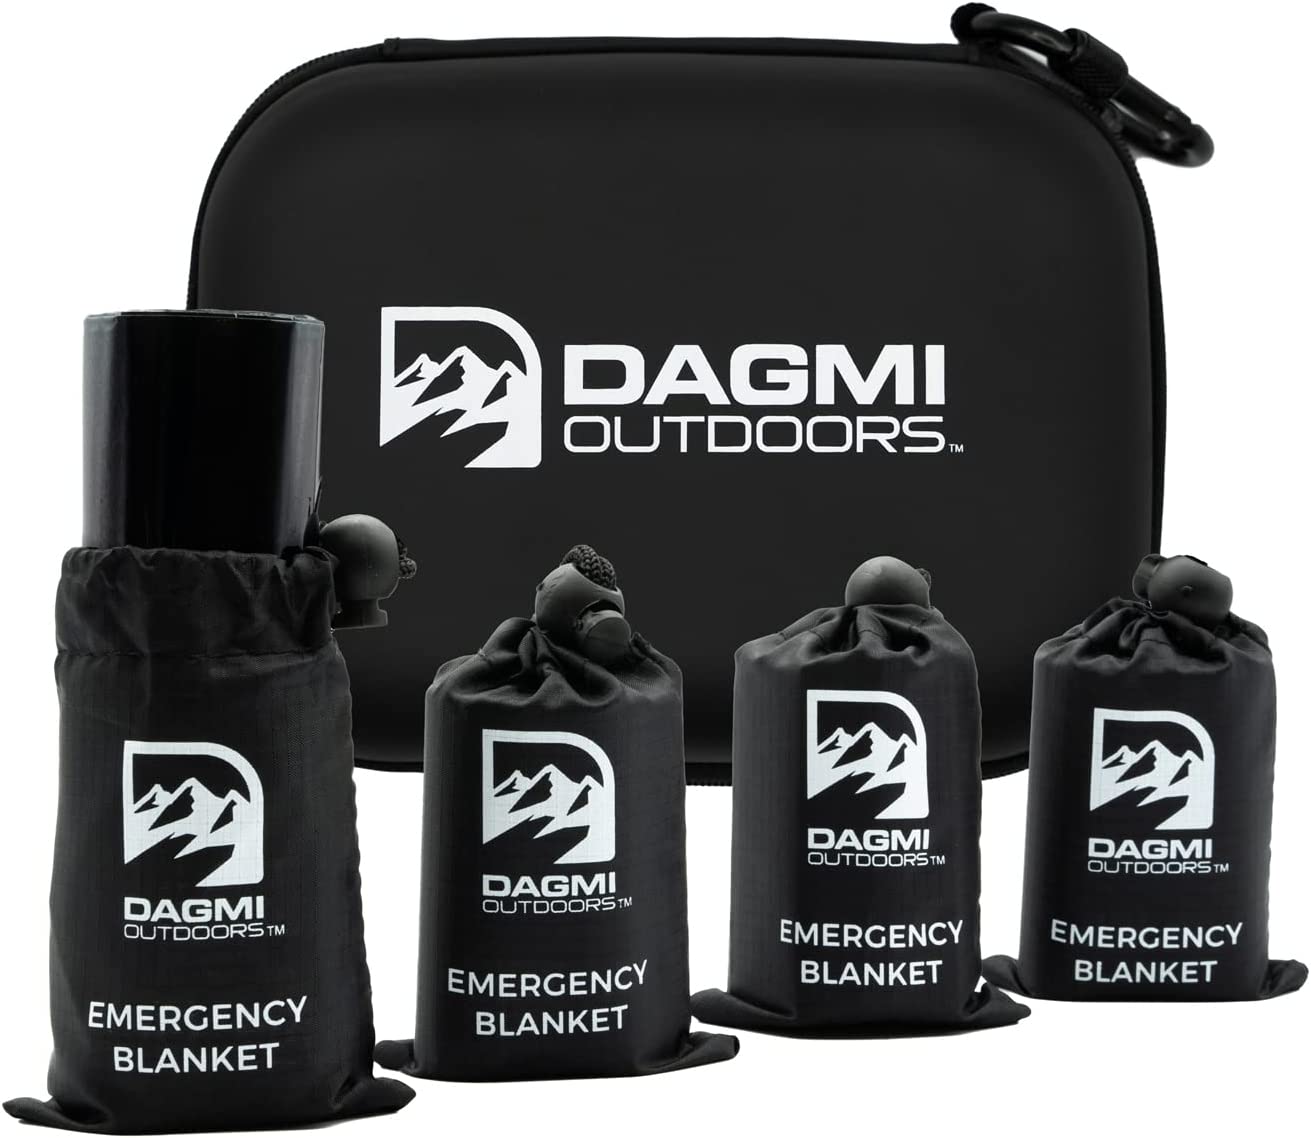 Dagmi Outdoors Emergency Survival Blanket 4 Pack Thermal Mylar Foil Space Blankets for Extreme Cold Weather – NASA Designed – Perfect for Camping, Hiking, Car, Warmth – Outdoor Waterproof Gear